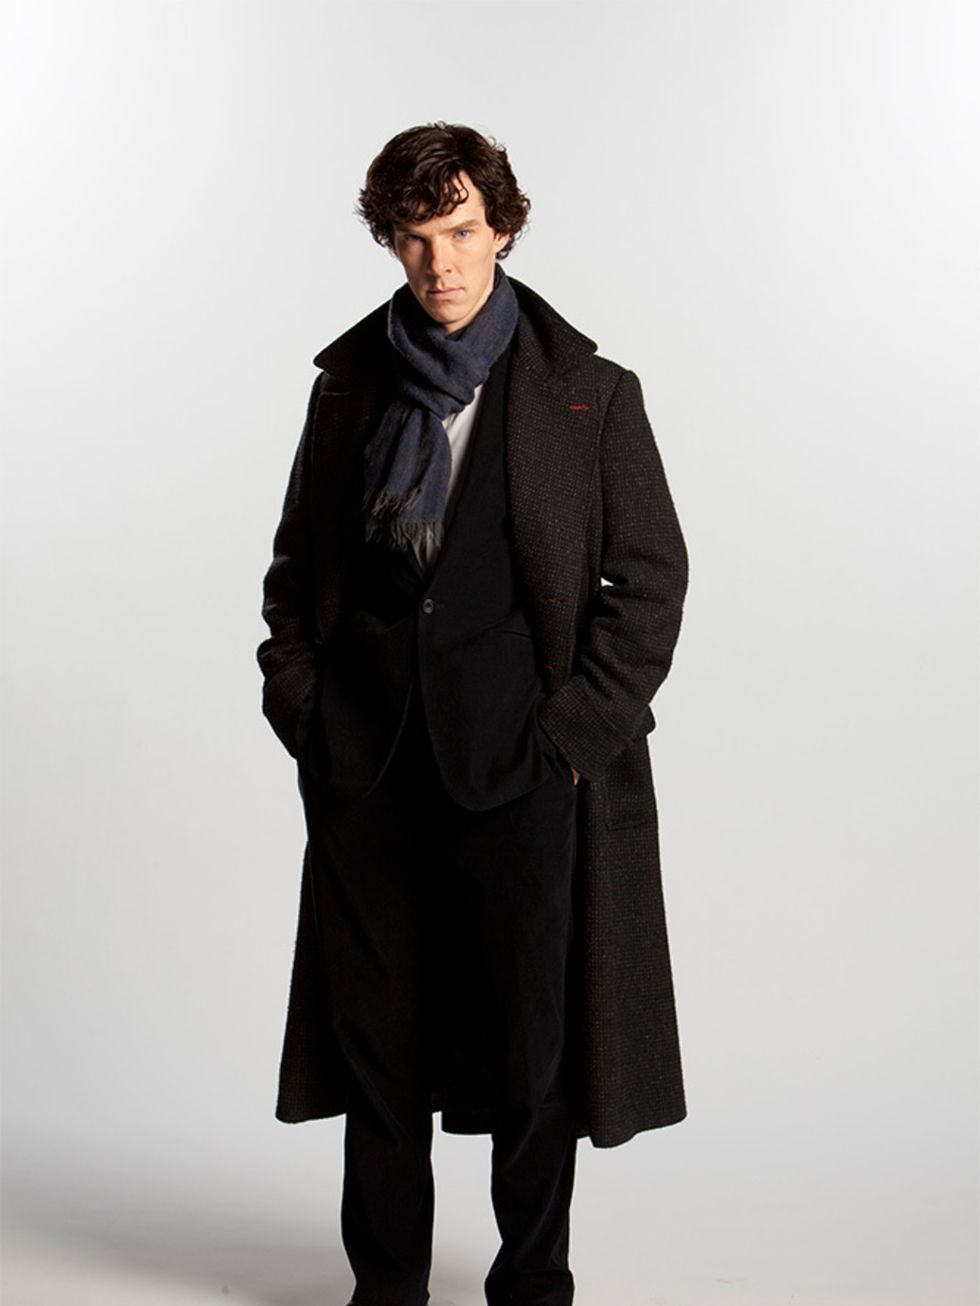 <p><strong>EXHIBITION: Sherlock Holmes: The Man Who Never Lived And Will Never Die</strong></p>

<p>Yes, we all love Benedict Cumberbatch, but this exhibition explores the history behind the character that propelled the actor to fame.</p>

<p>This weekend